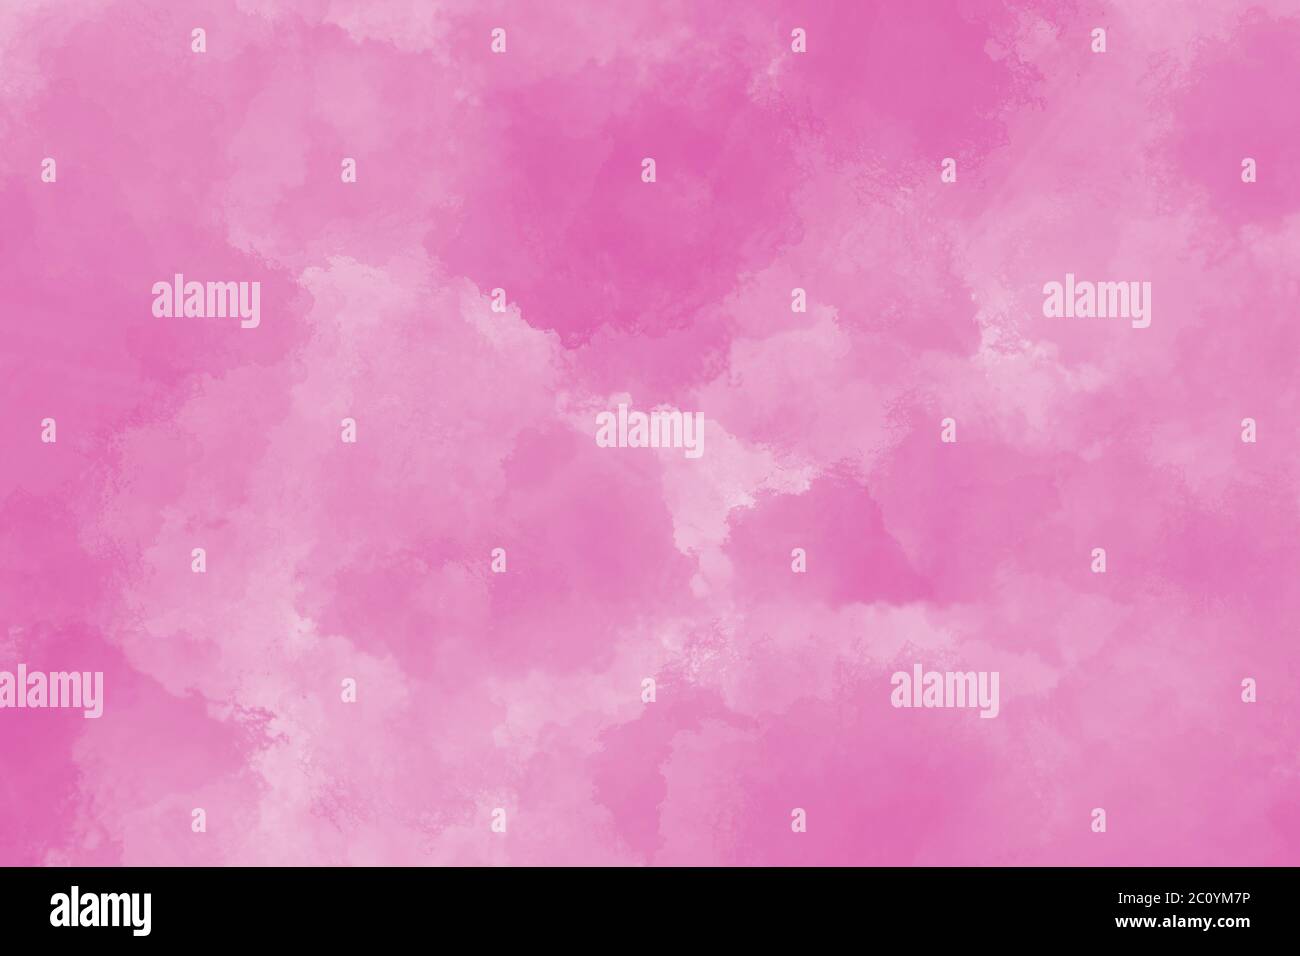 Abstract pink watercolor background texture on white paper background Stock Photo